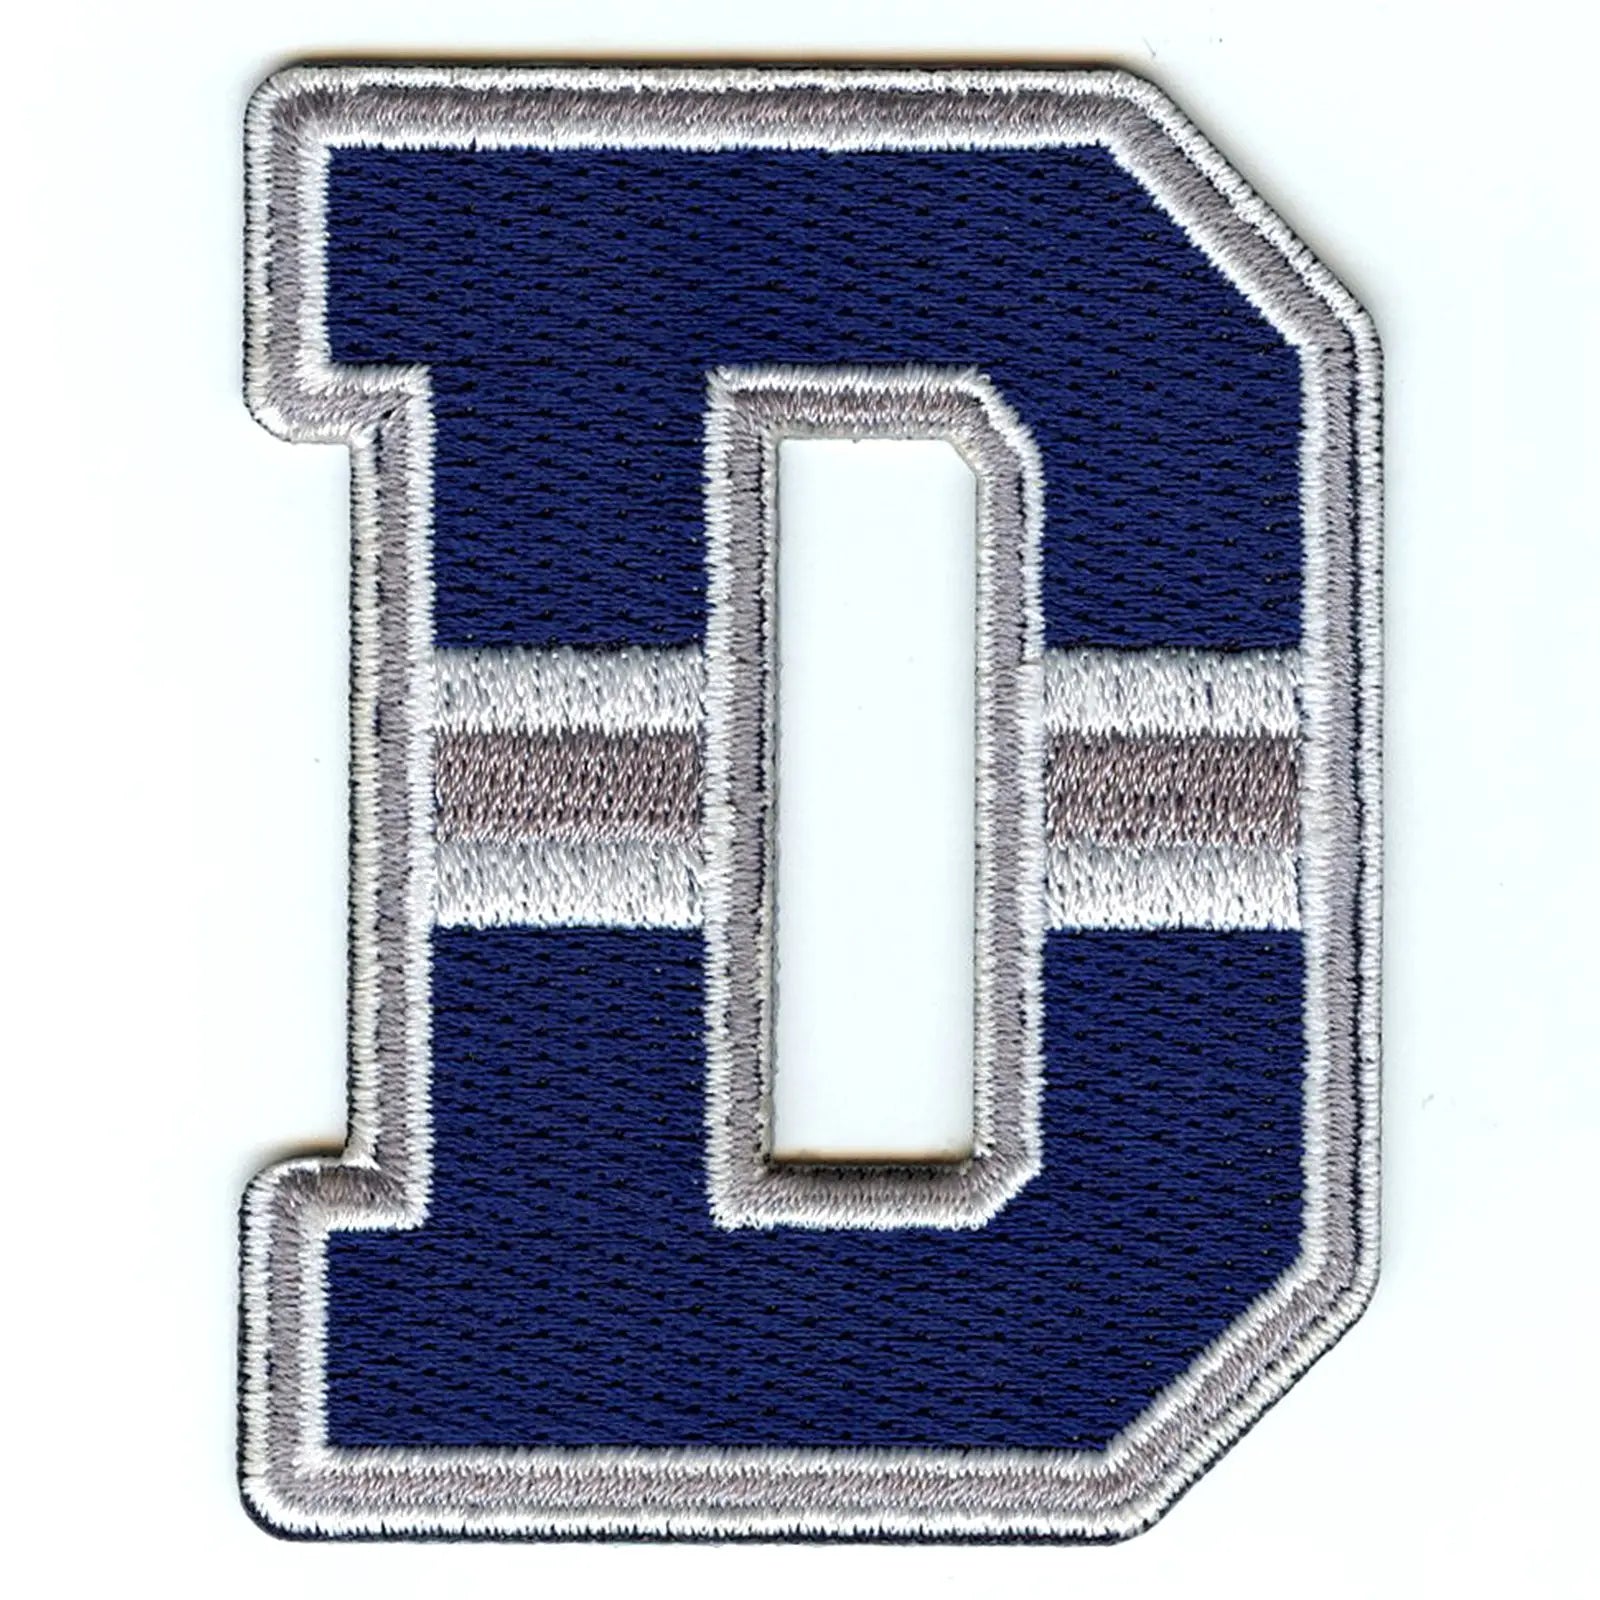 Dallas Cowboys Anniversary Style-1 Embroidered Sew On Patch